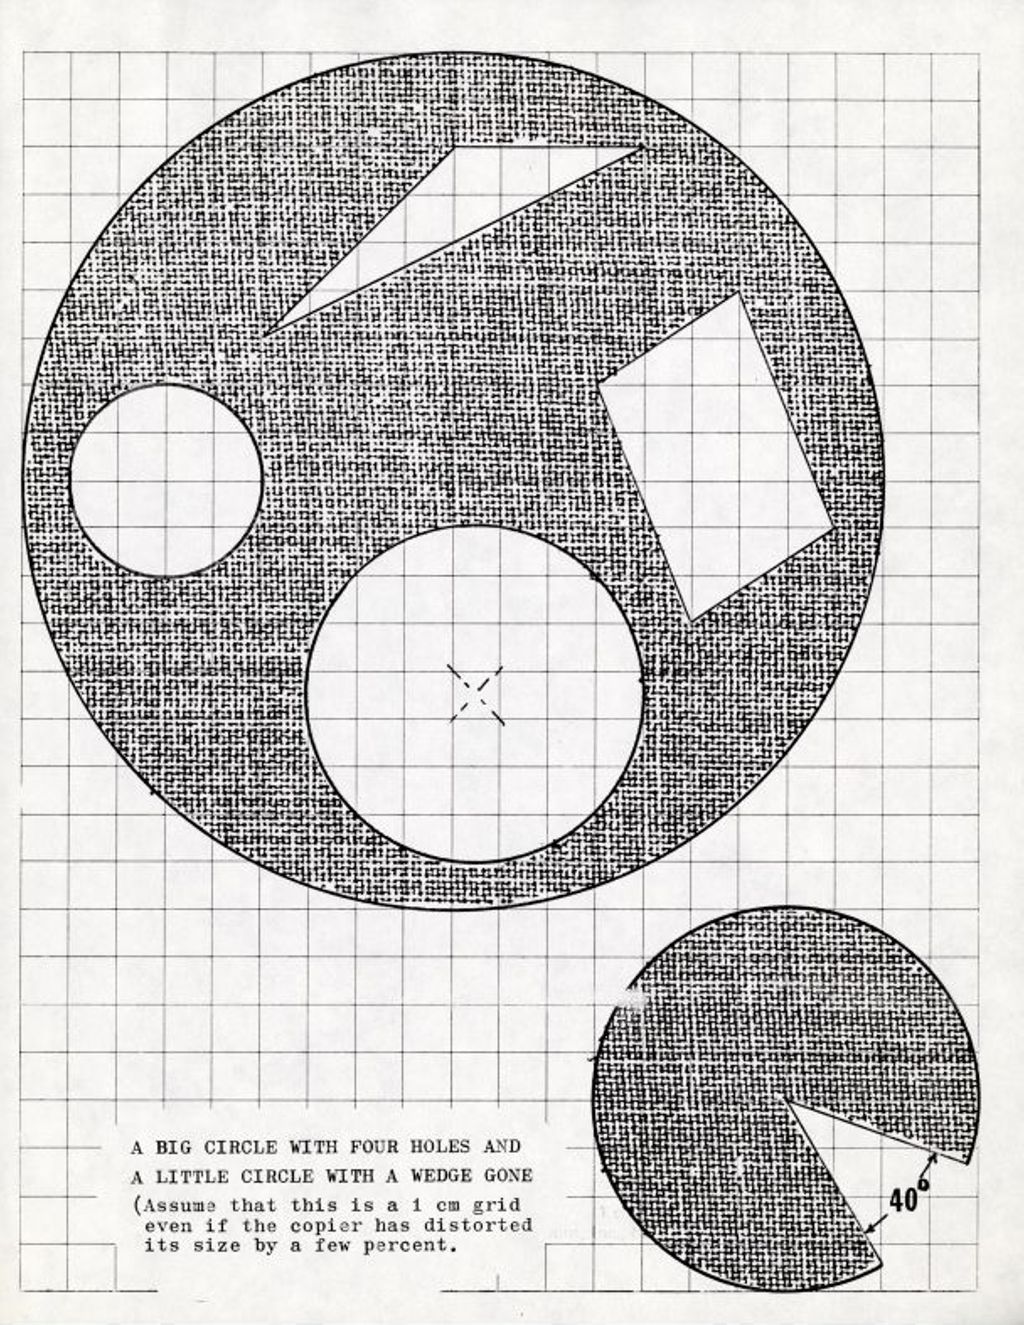 Miniature of A Big Circle with Four Holes and A Little Circle with a Wedge Gone